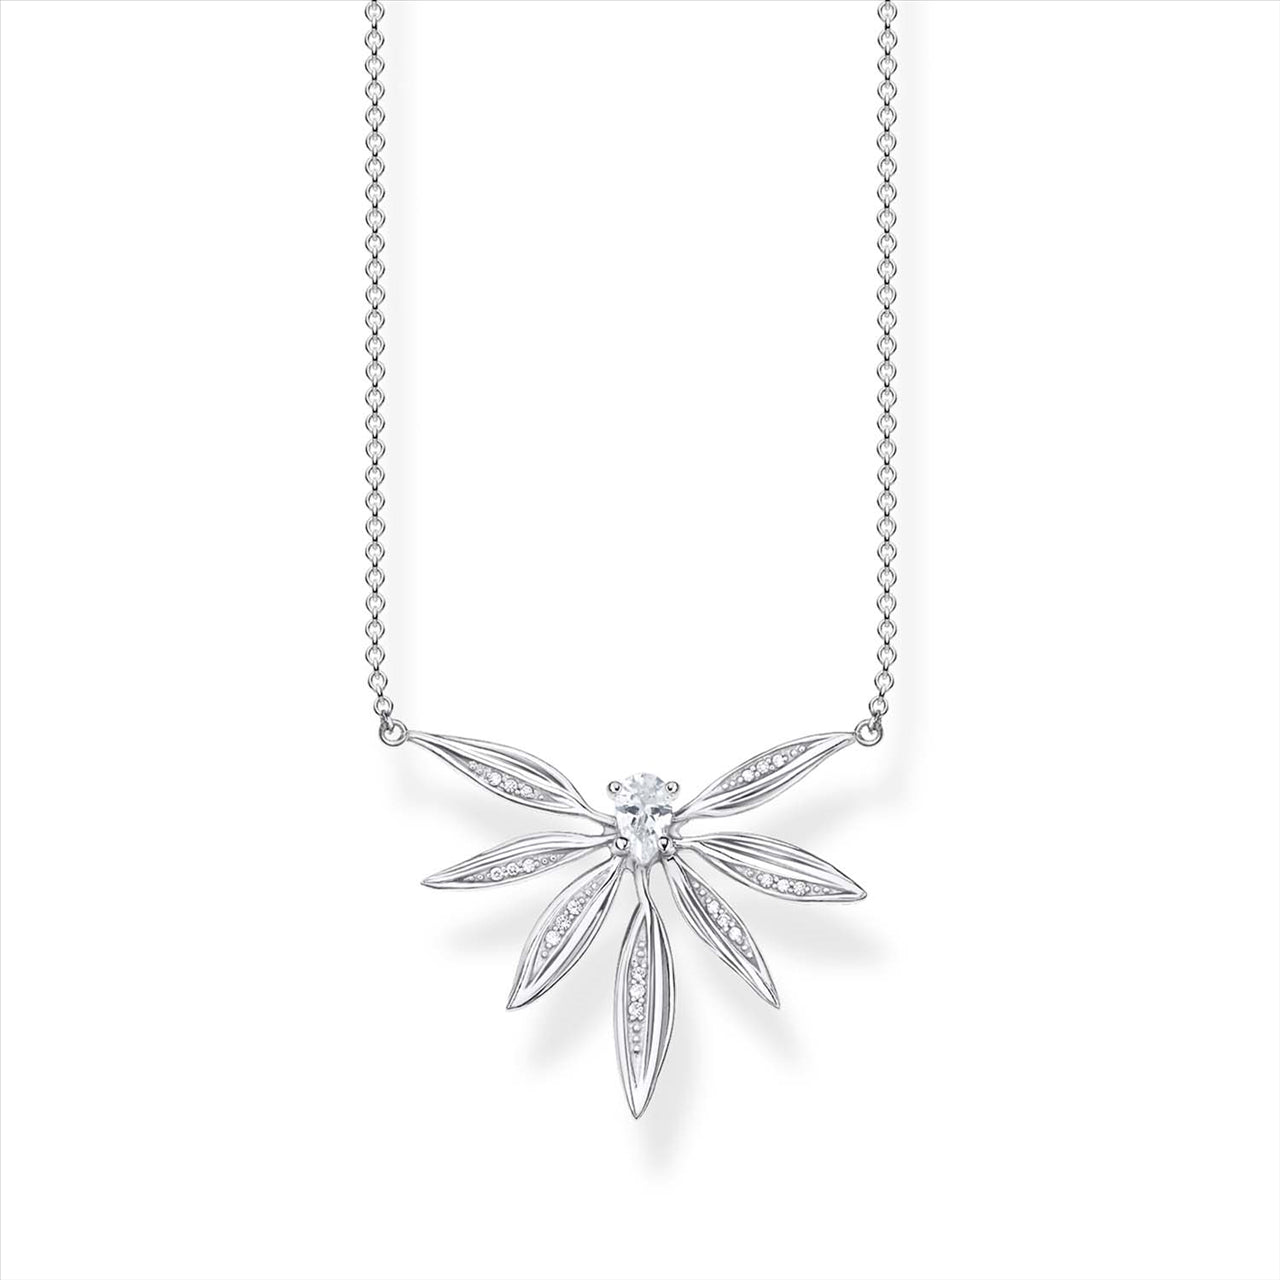 Thomas Sabo Leaves Silver Necklace 40-45cm